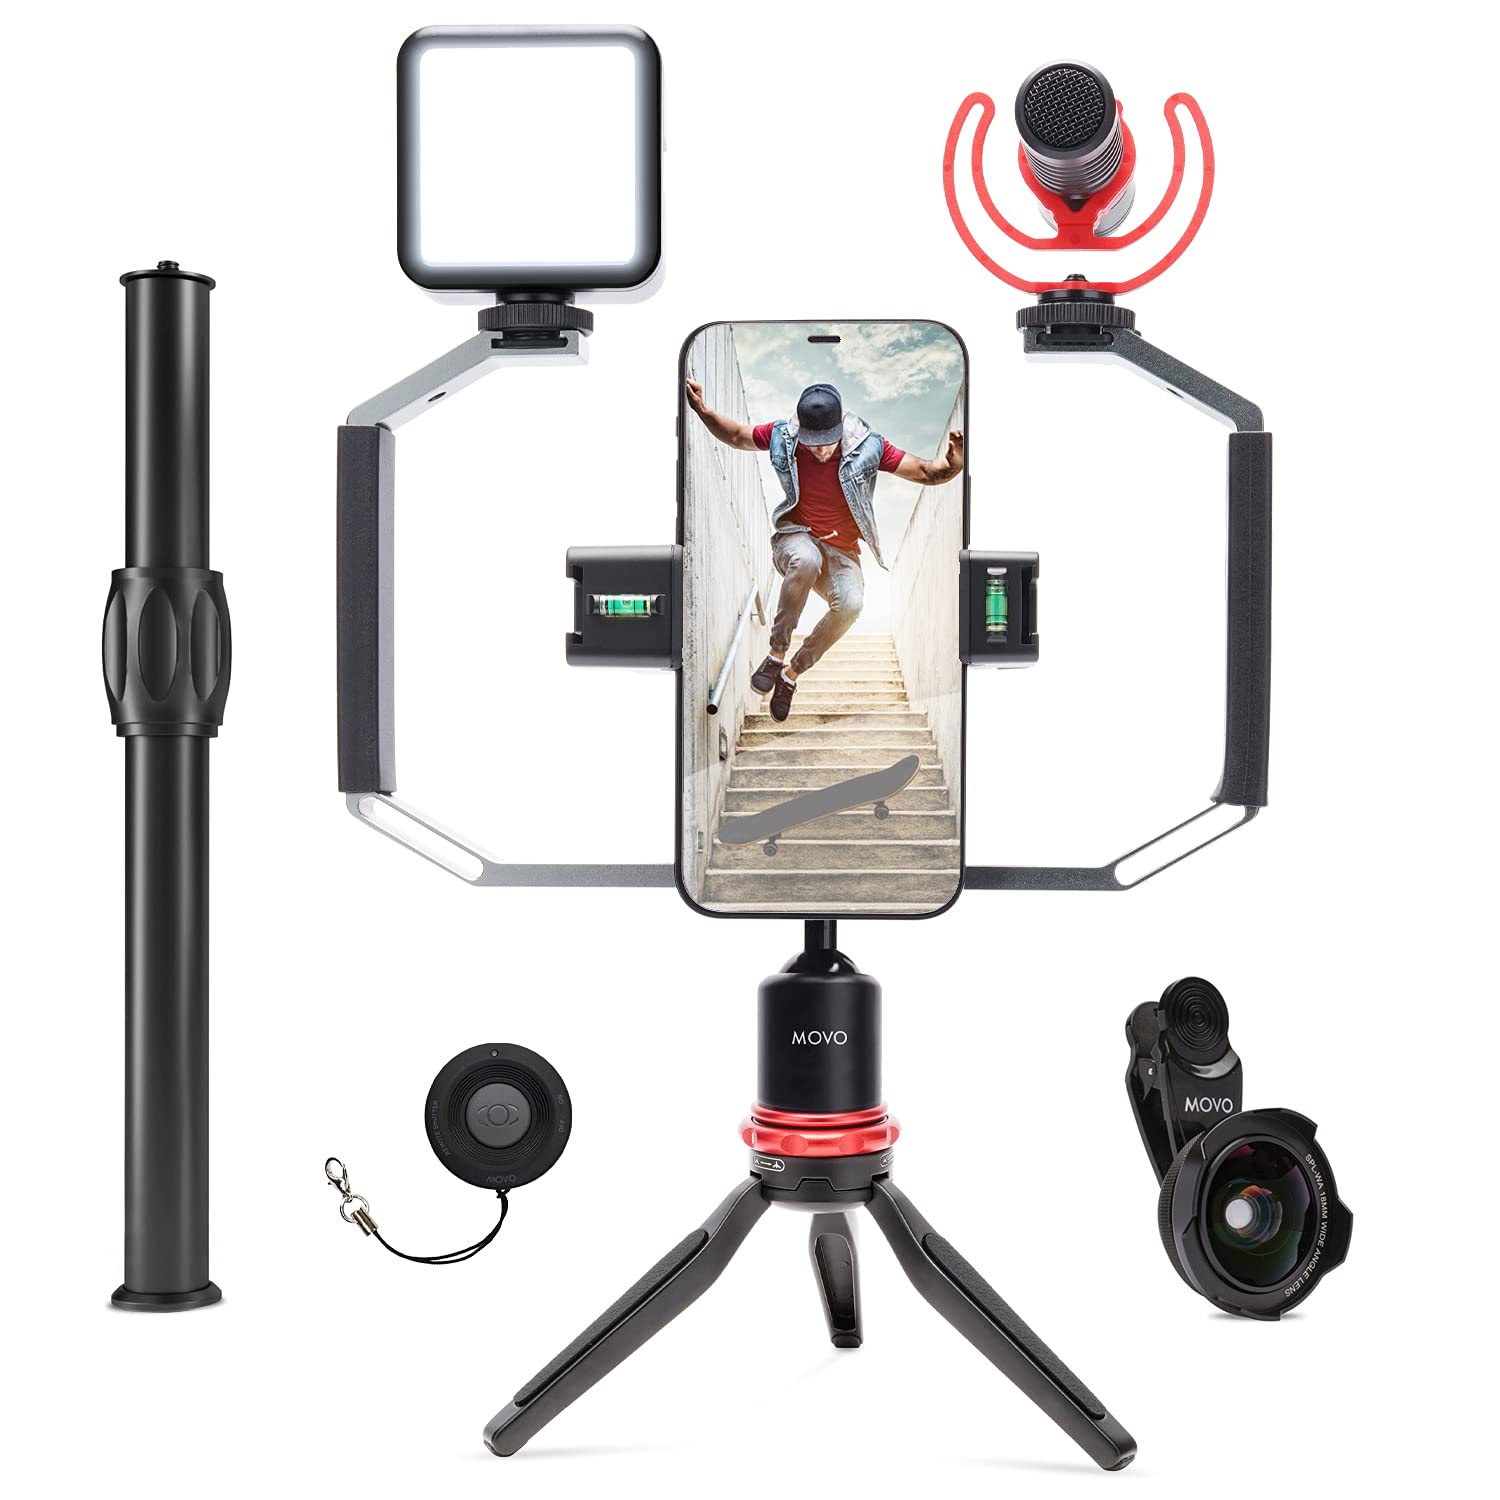 Movo iVlog3 Smartphone Video Bundle with Movo VXR10-PRO Directional Microphone, Mini Tripod, LED Camera Light, Wide-Angle Lens - Cell Phone Tripod Stand - External Microphone for iPhone and Android  - Very Good